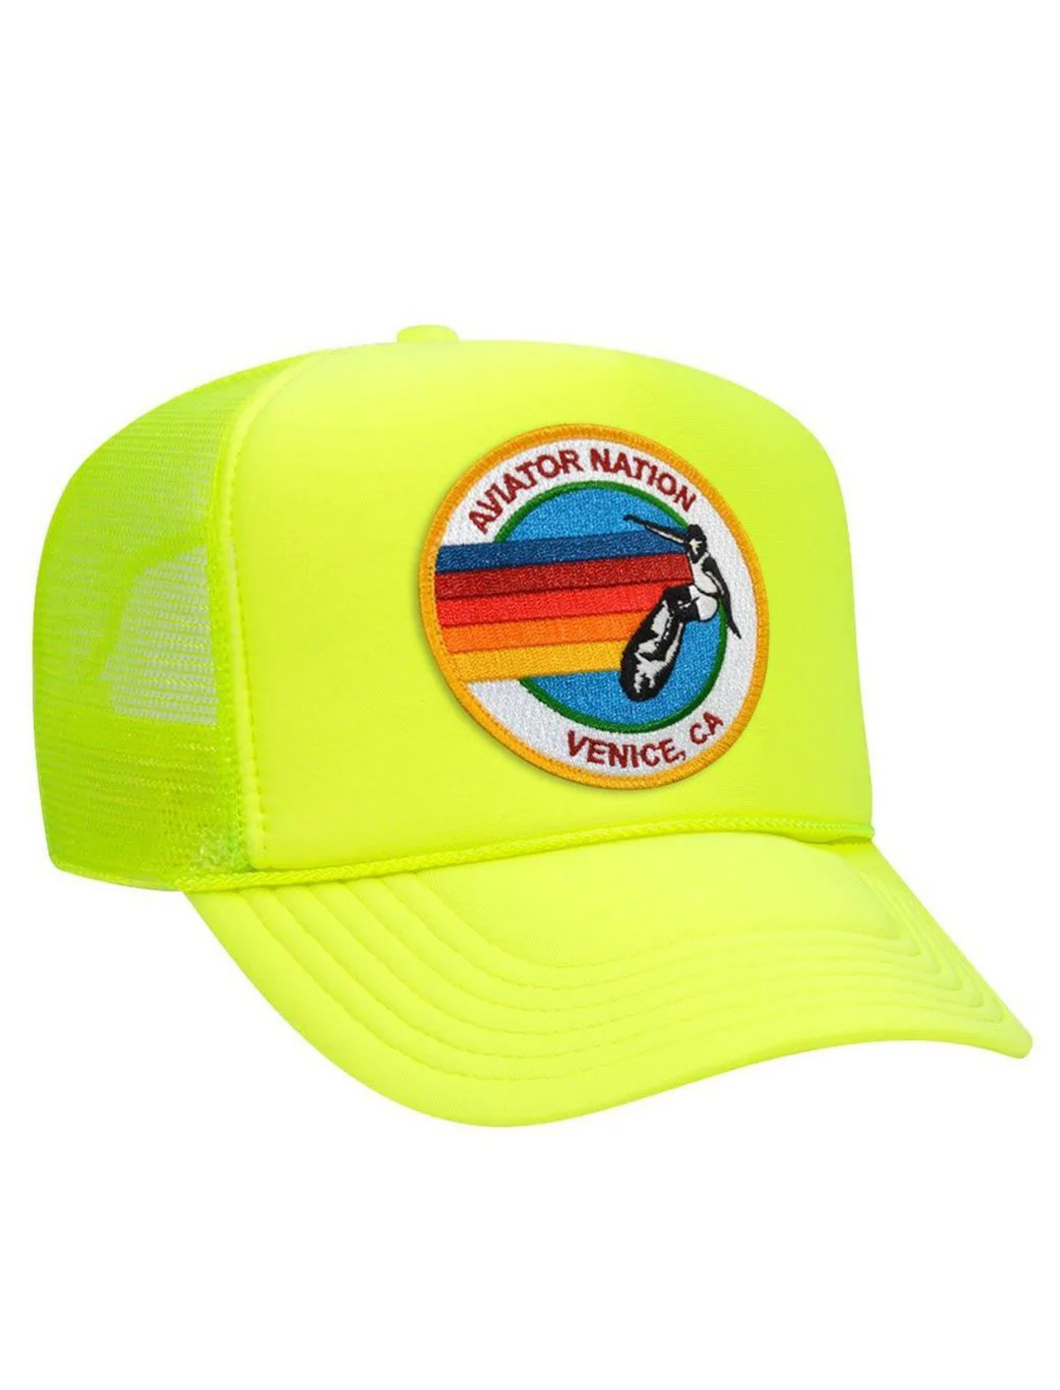 Aviator Nation Signature Vintage Low Rise Trucker Hat in Neon Yellow